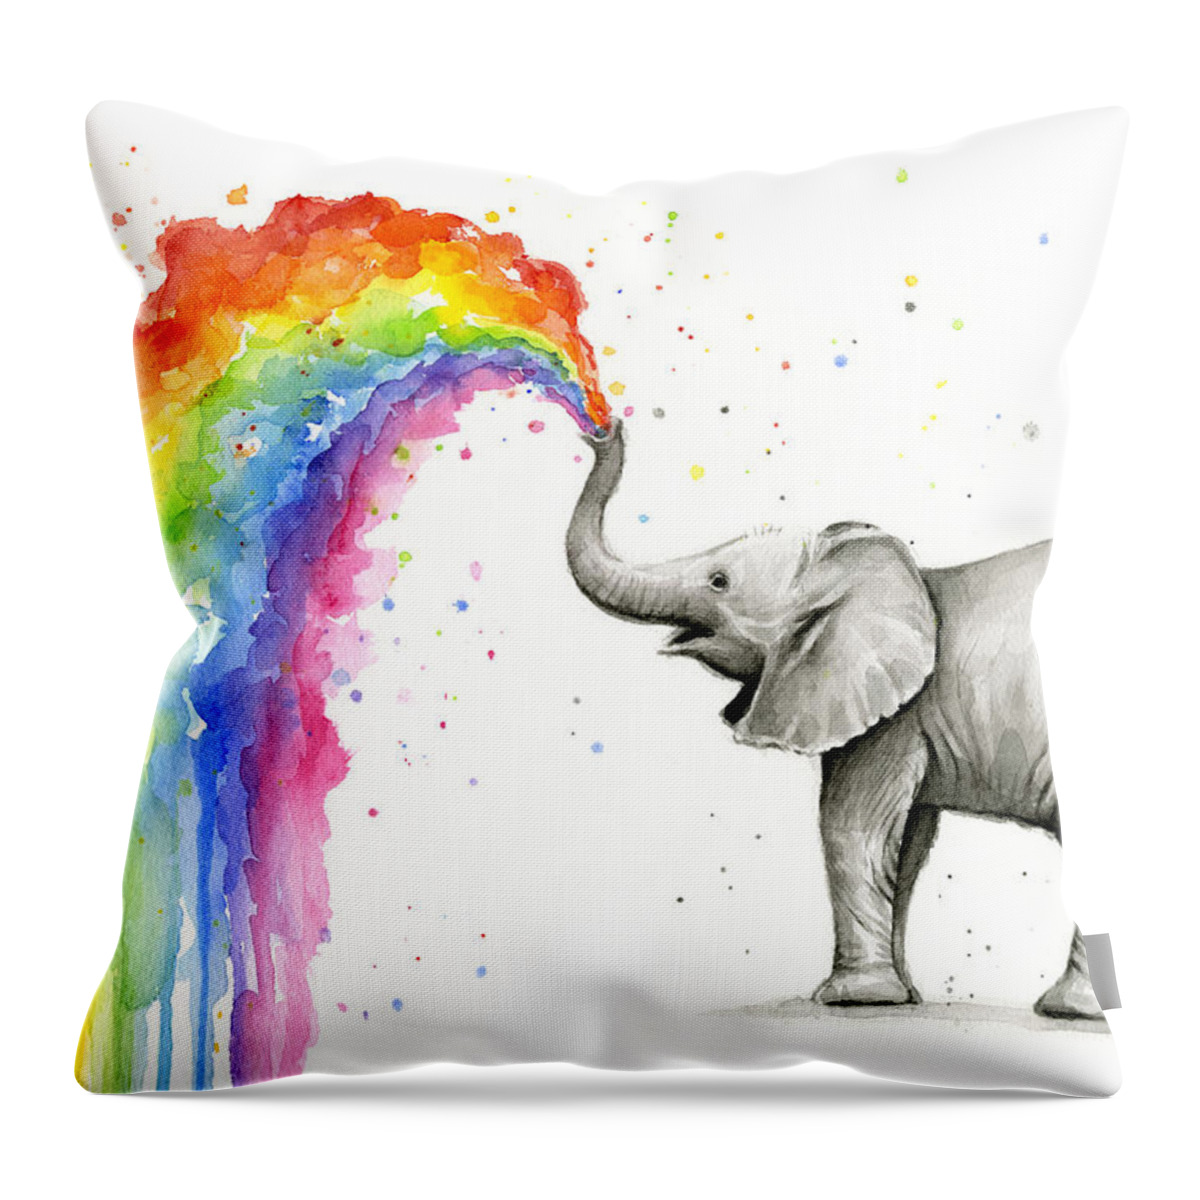 Baby Throw Pillow featuring the painting Baby Elephant Spraying Rainbow by Olga Shvartsur